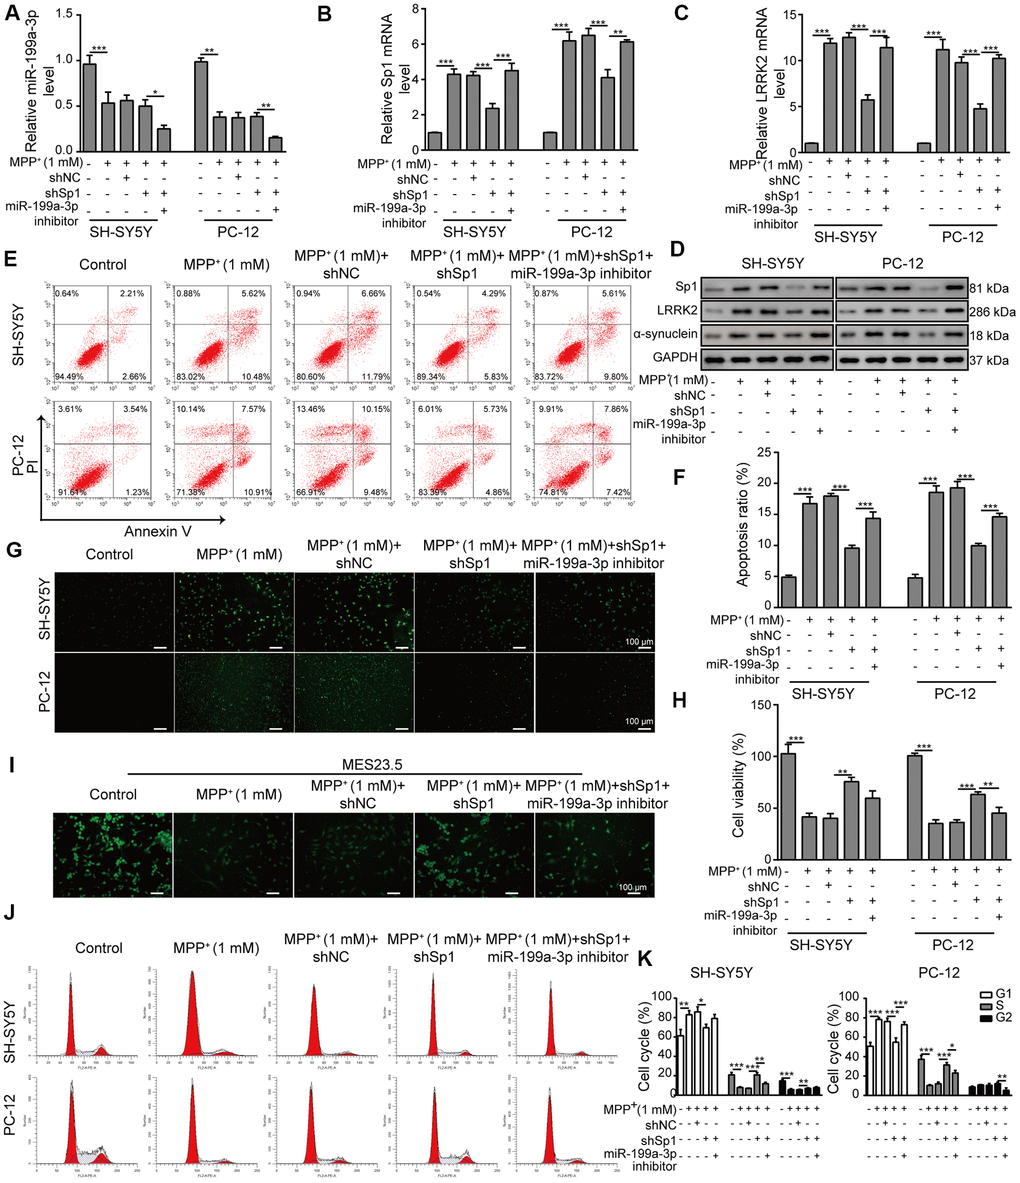 Neuroprotective effects of shSp1 are suppressed by miR-199a-3p inhibition. SH-SY5Y and PC-12 cells were treated with 1 mM MPP+ after transfection with shSp1 or the miR-199a-3p inhibitor. qPCR was performed to assess the expression of (A) miR-199a-3p, (B) Sp1 mRNA, and (C) LRRK2 mRNA. (D) Western blot analysis was conducted to measure the protein expression of Sp1, LRRK2 and α-synuclein under the indicated conditions. (E) Flow cytometry analysis of apoptosis was performed after the cells were transfected with shSp1 and/or the miR-199a-3p inhibitor. (F) Comparison of apoptotic cells in the indicated groups. (G) TUNEL staining was performed to assess cell apoptosis. (H) Cell viability was determined by the CCK-8 assay after the cells were transfected with shSp1 alone or co-transfected with the miR-199a-3p inhibitor. (I) MES23.5 cells were transfected with shNC, shSp1 or the miR-199a-3p inhibitor and treated with 1 mM MPP+. The localization of TUBB3 in MES23.5 cells is shown in the representative images. (J) Cell cycle phases were determined by propidium iodide staining and flow cytometry. (K) Comparison of the cell cycle for the different groups. The data are representative of three experiments. *p p p 